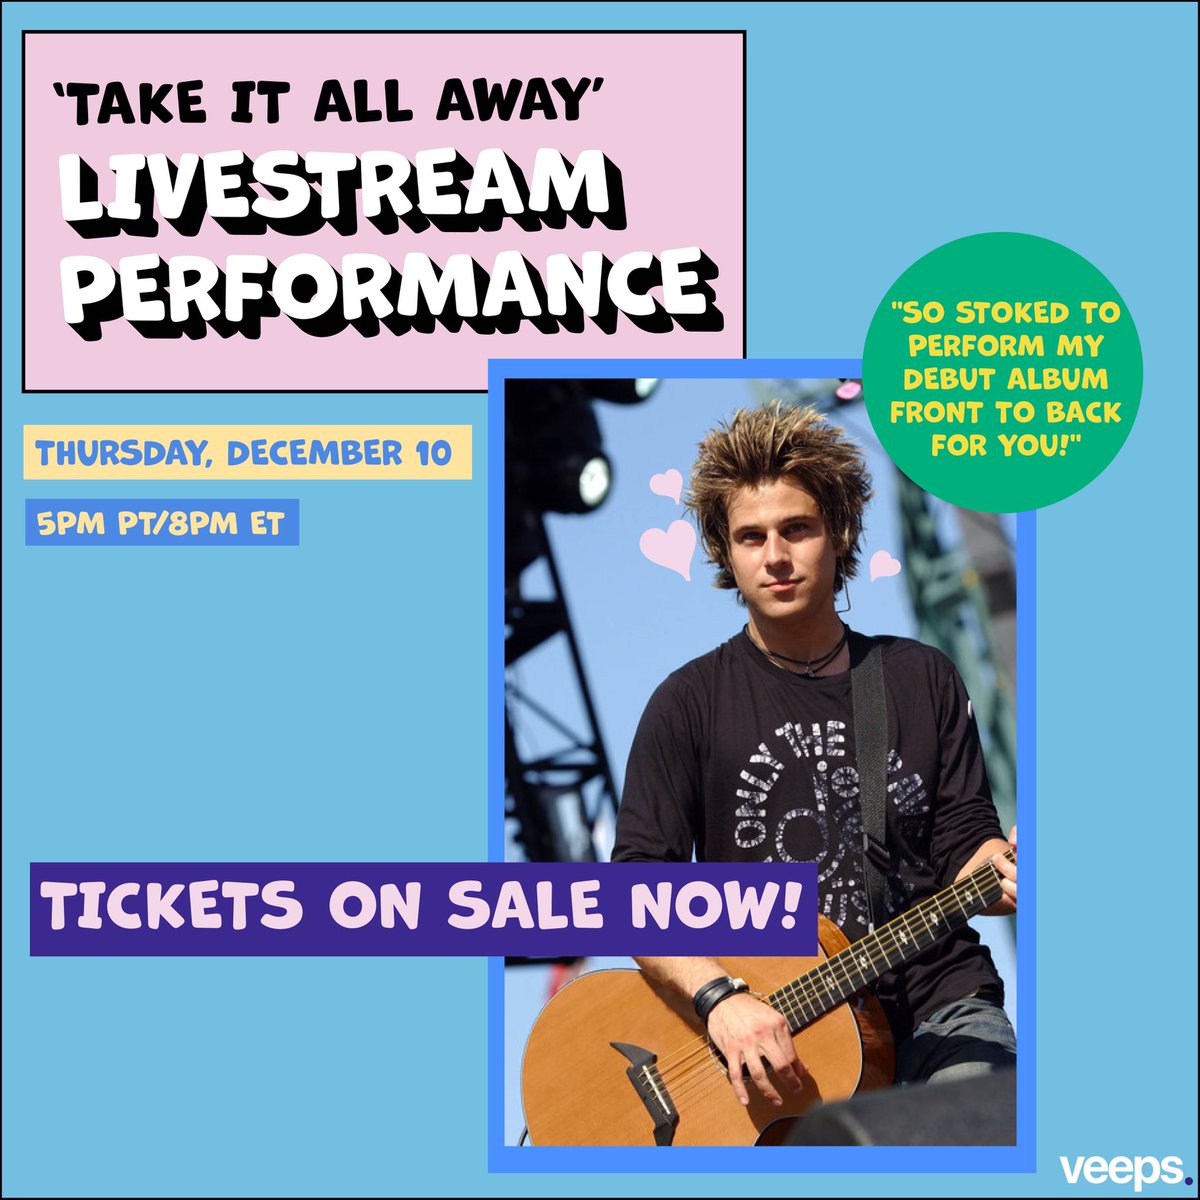 Remembering tha good ol days of teen magazines and this 'do🔥 We're less than ONE week away from my TAKE IT ALL AWAY livestream performance!! If you can't make it Thursday 5PM PT/8PM ET you can still grab a ticket to watch a recording for up to a week :-) bit.ly/TakeItAllAway